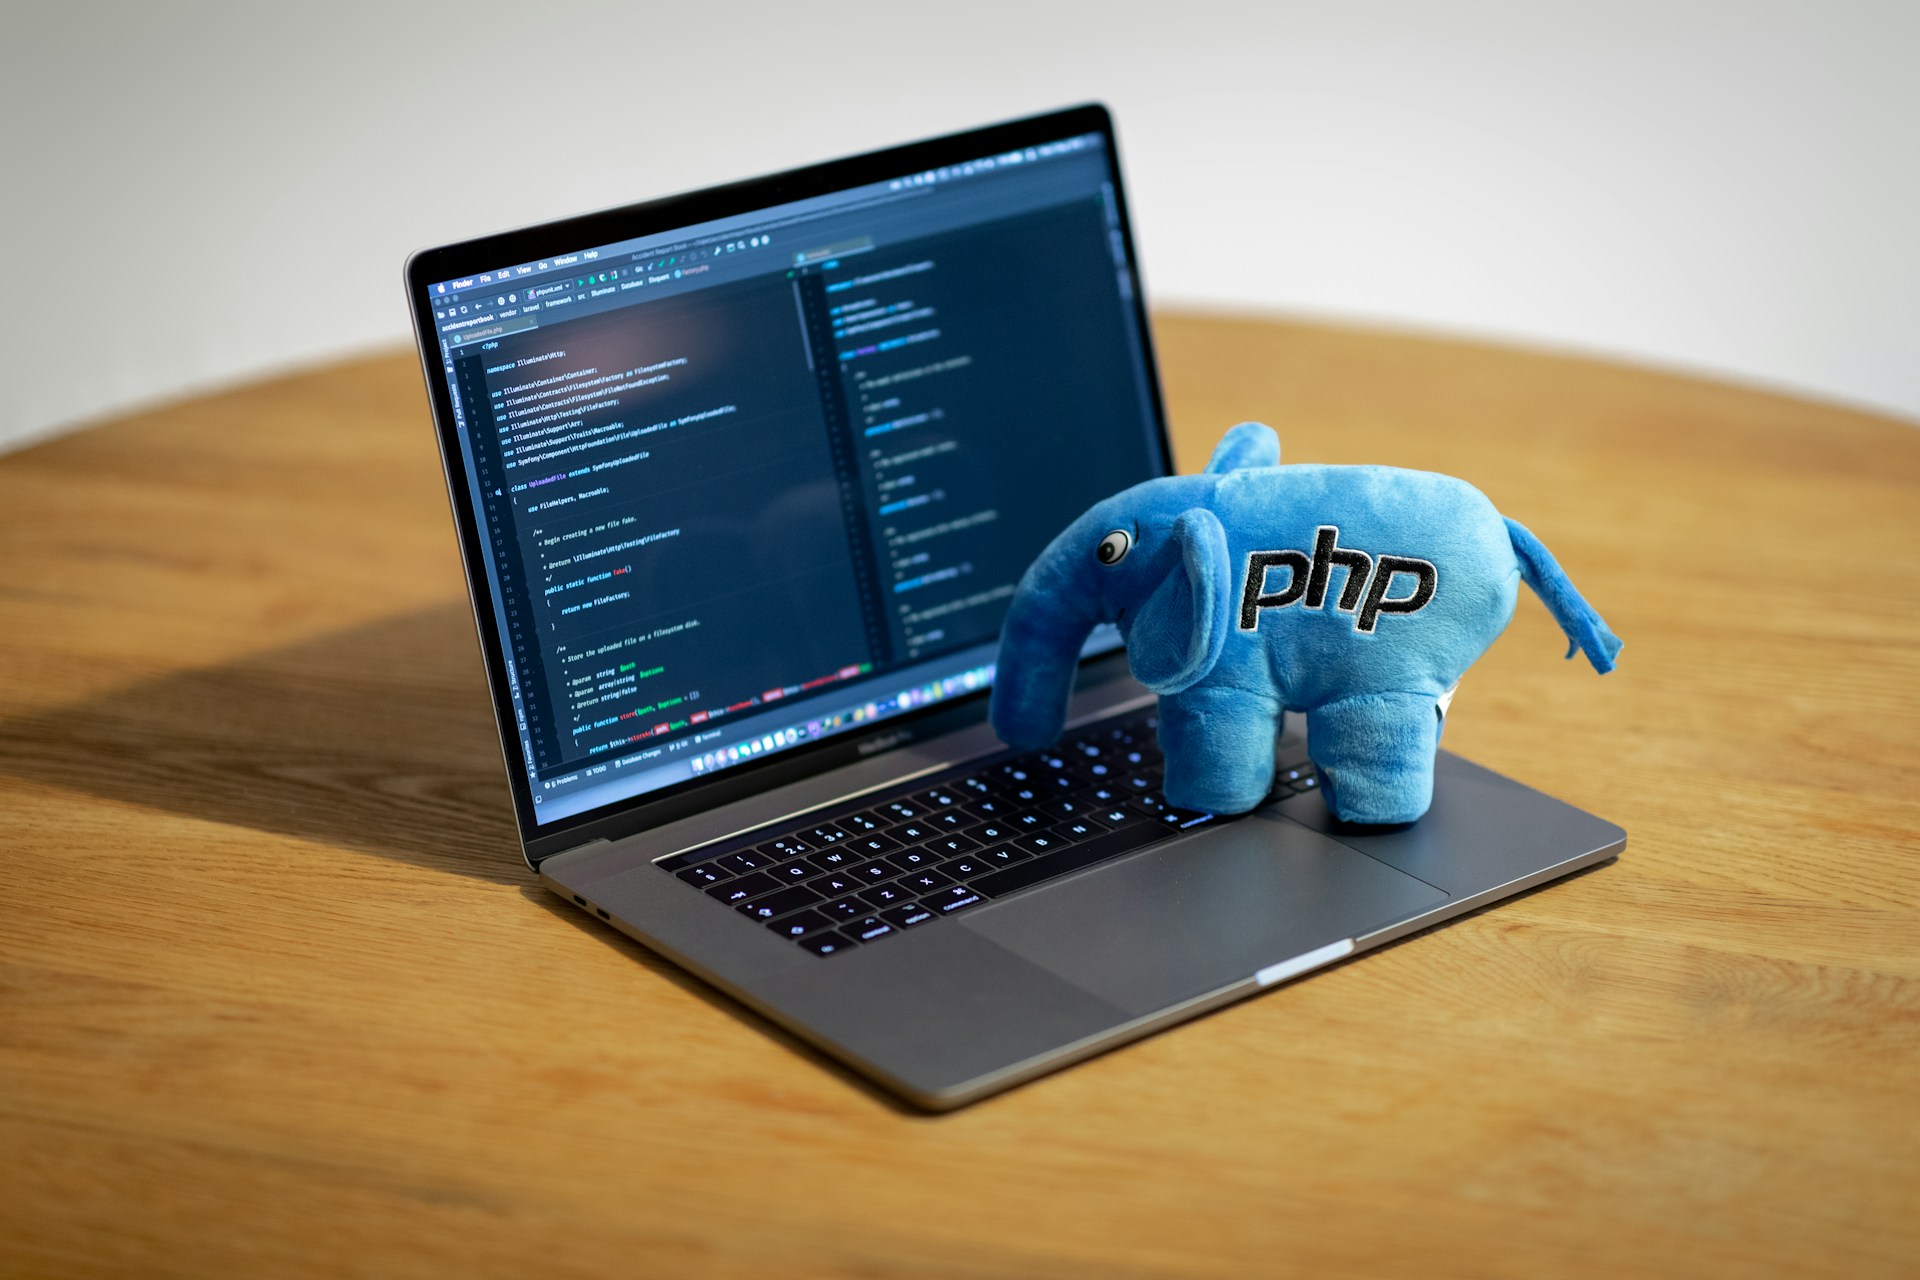 Top 5 PHP Frameworks for Web Development To Try in 2021